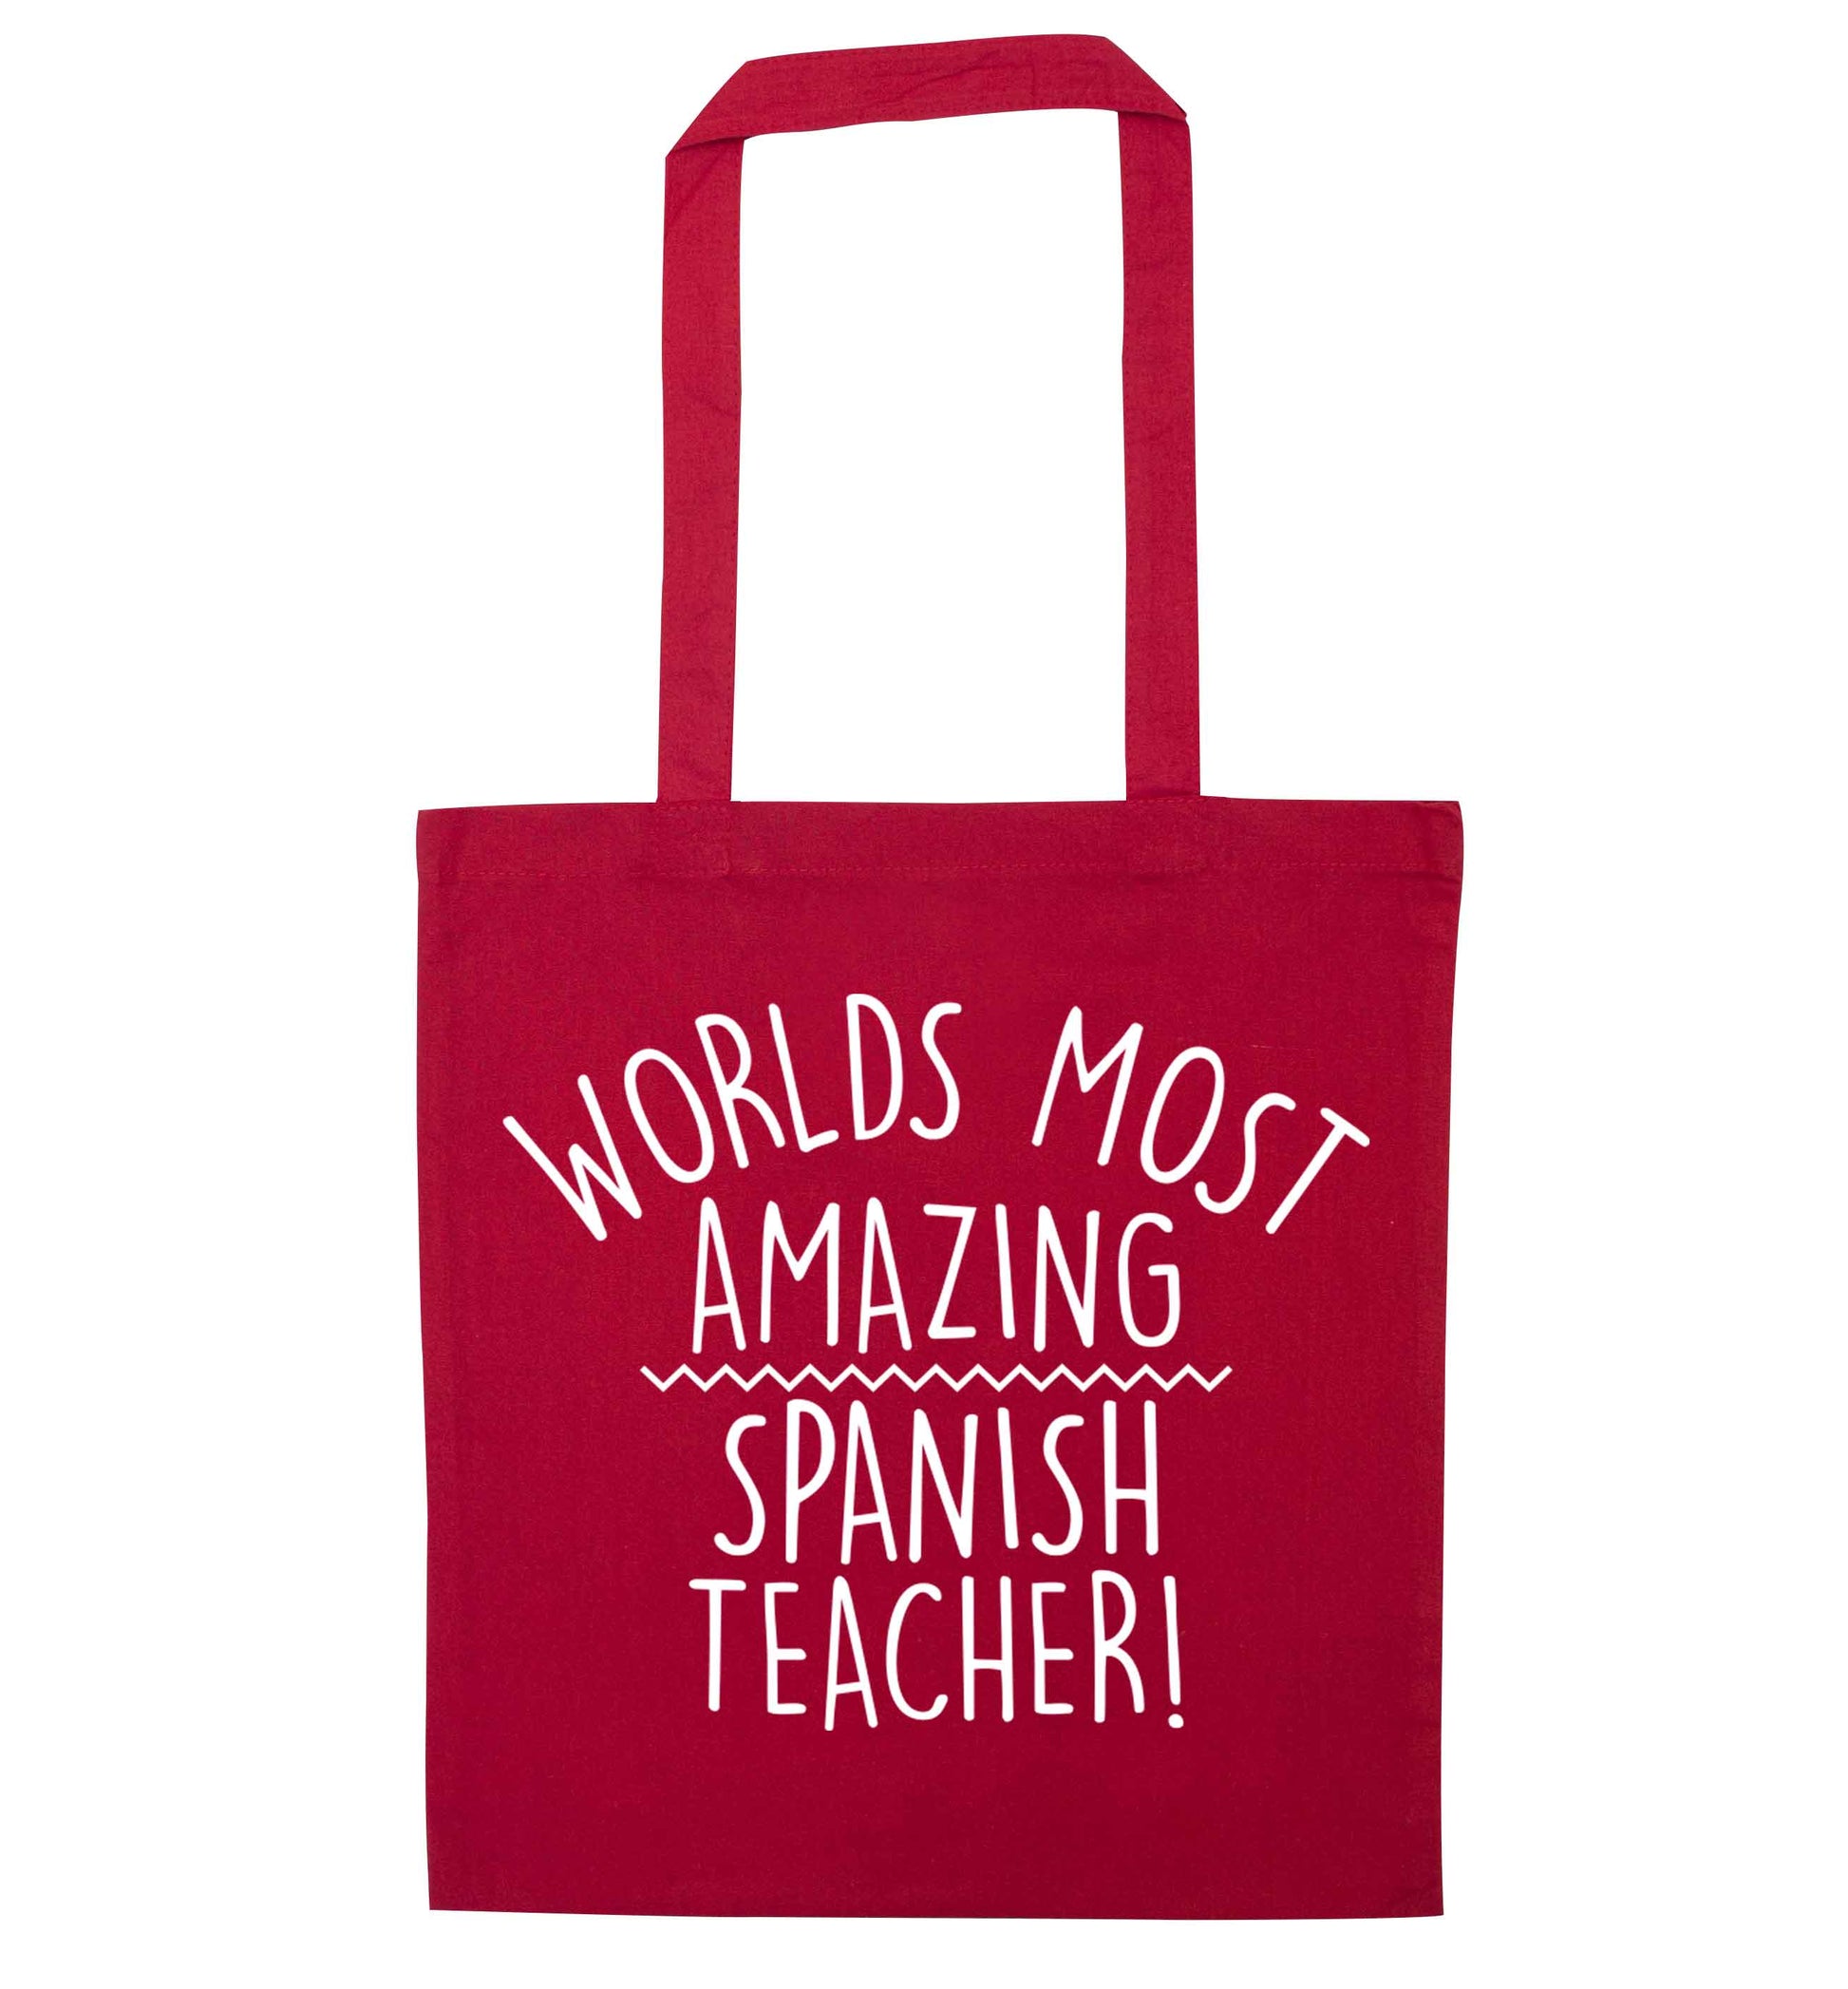 Worlds most amazing Spanish teacher red tote bag